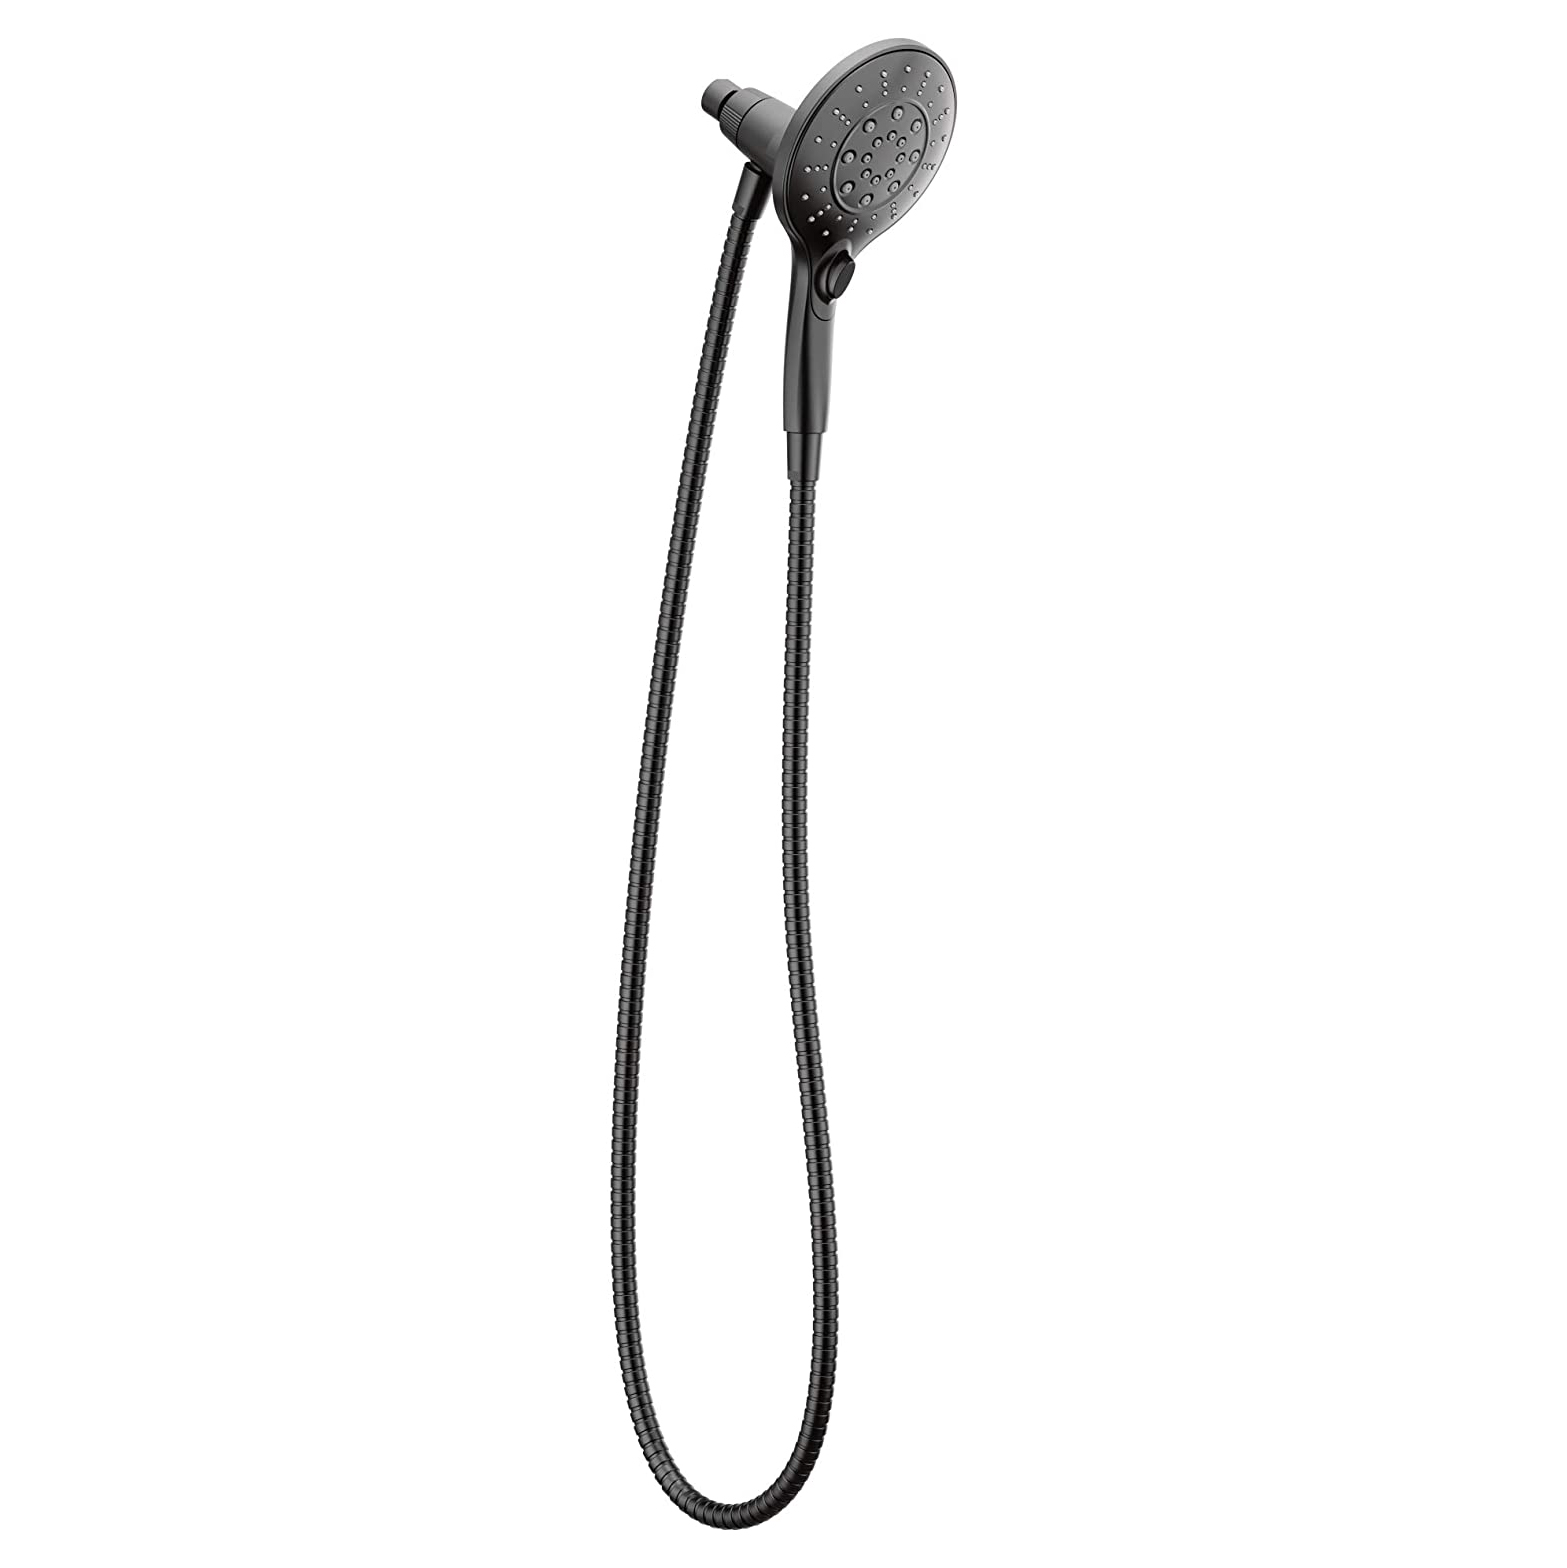 Attract Multi-Function Hand Shower In Matte Black